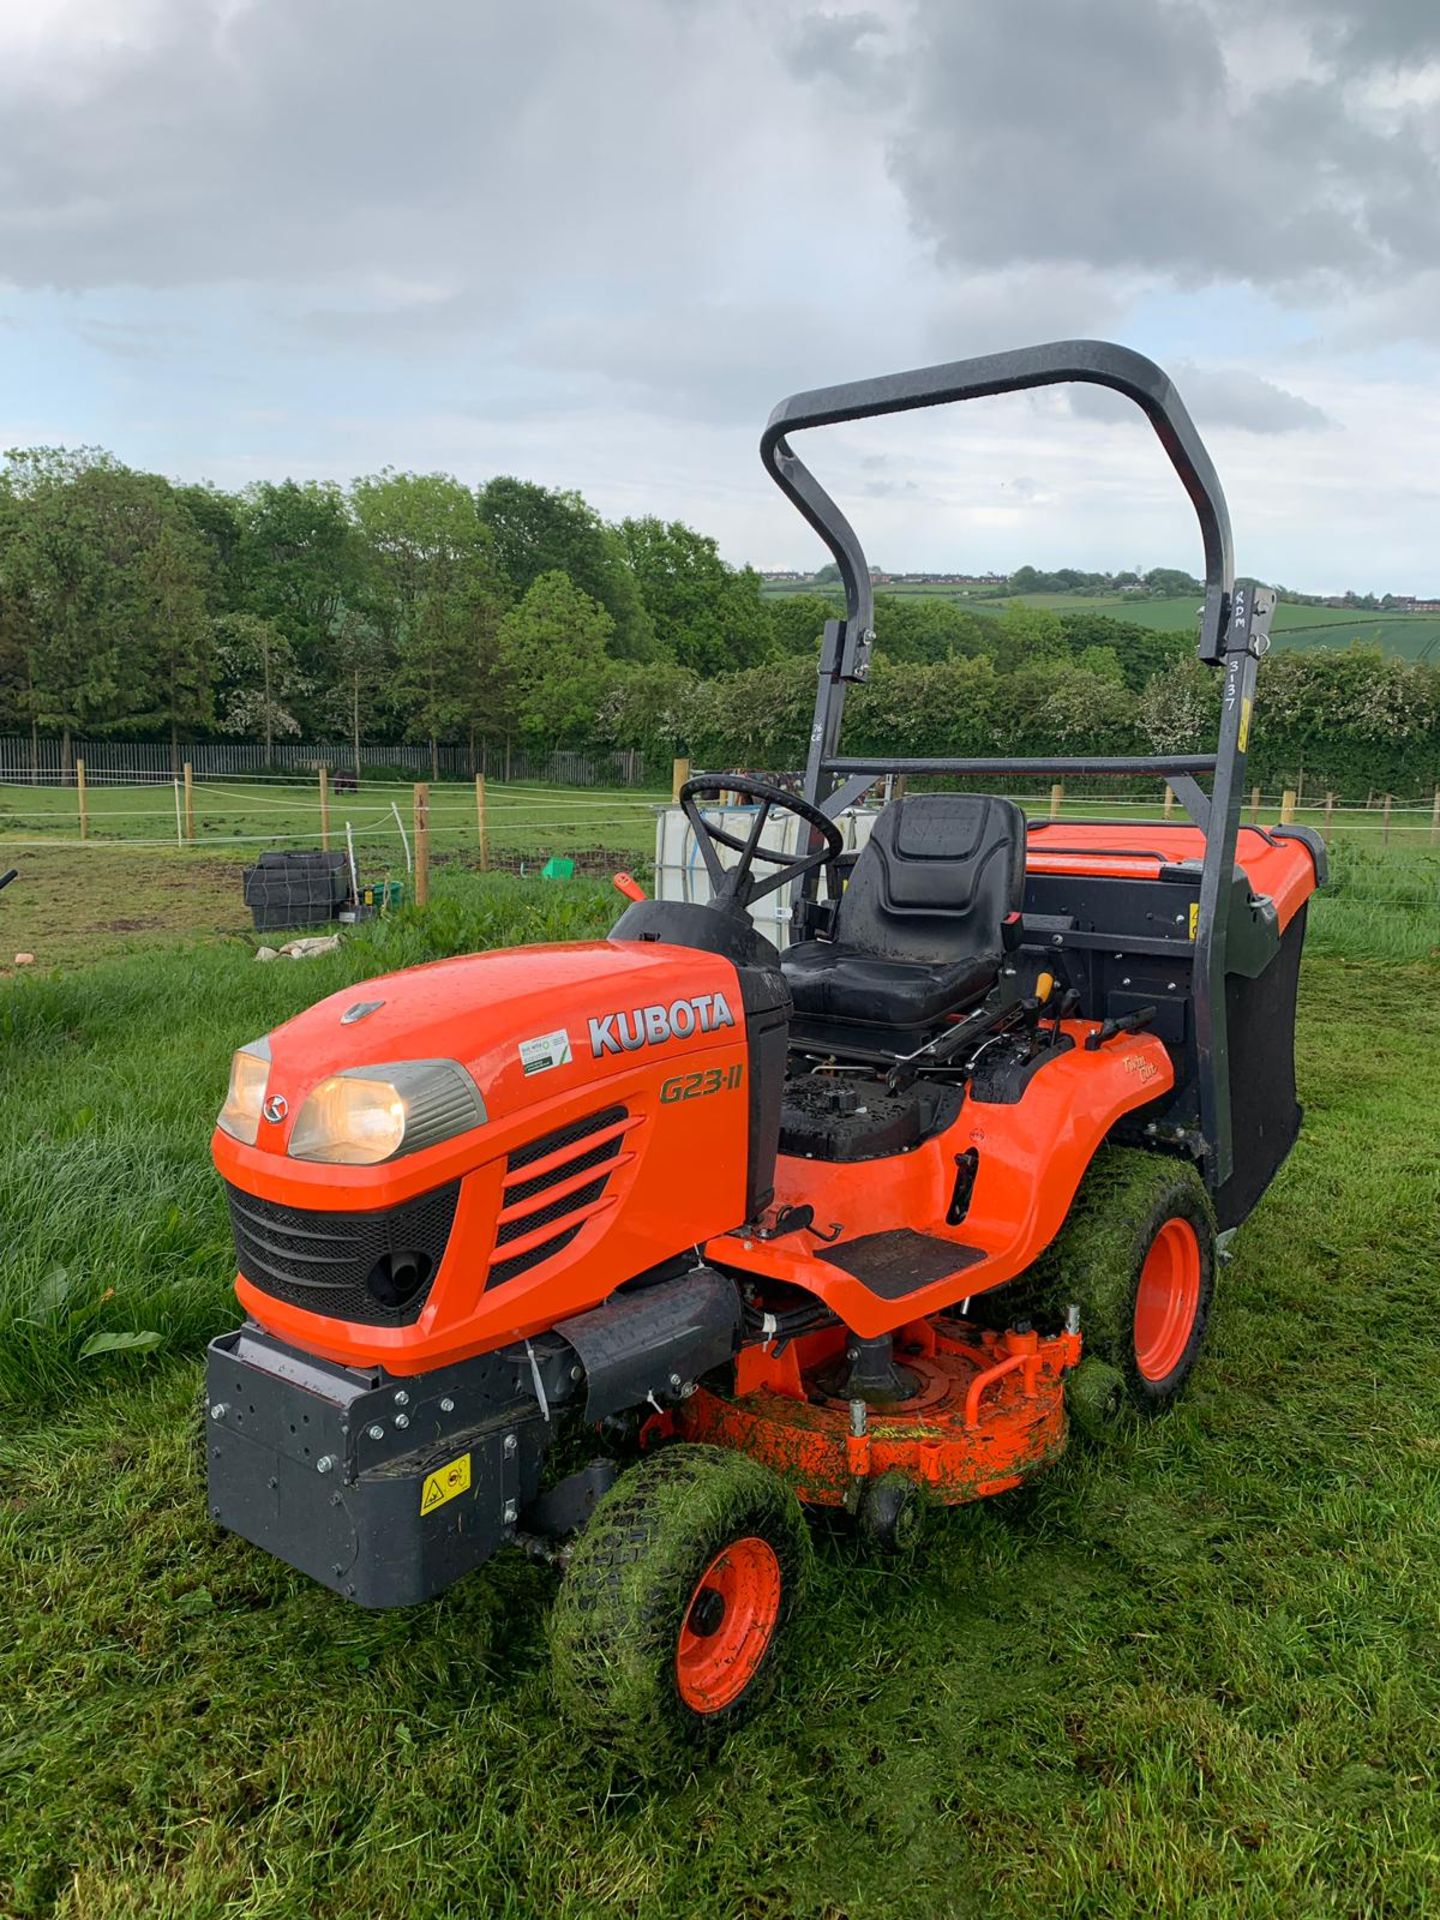 2015 KUBOTA G23-II TWIN CUT LAWN MOWER WITH ROLL BAR, HYDRAULIC TIP, LOW DUMP COLLECTOR - 28 HOURS!! - Image 3 of 15